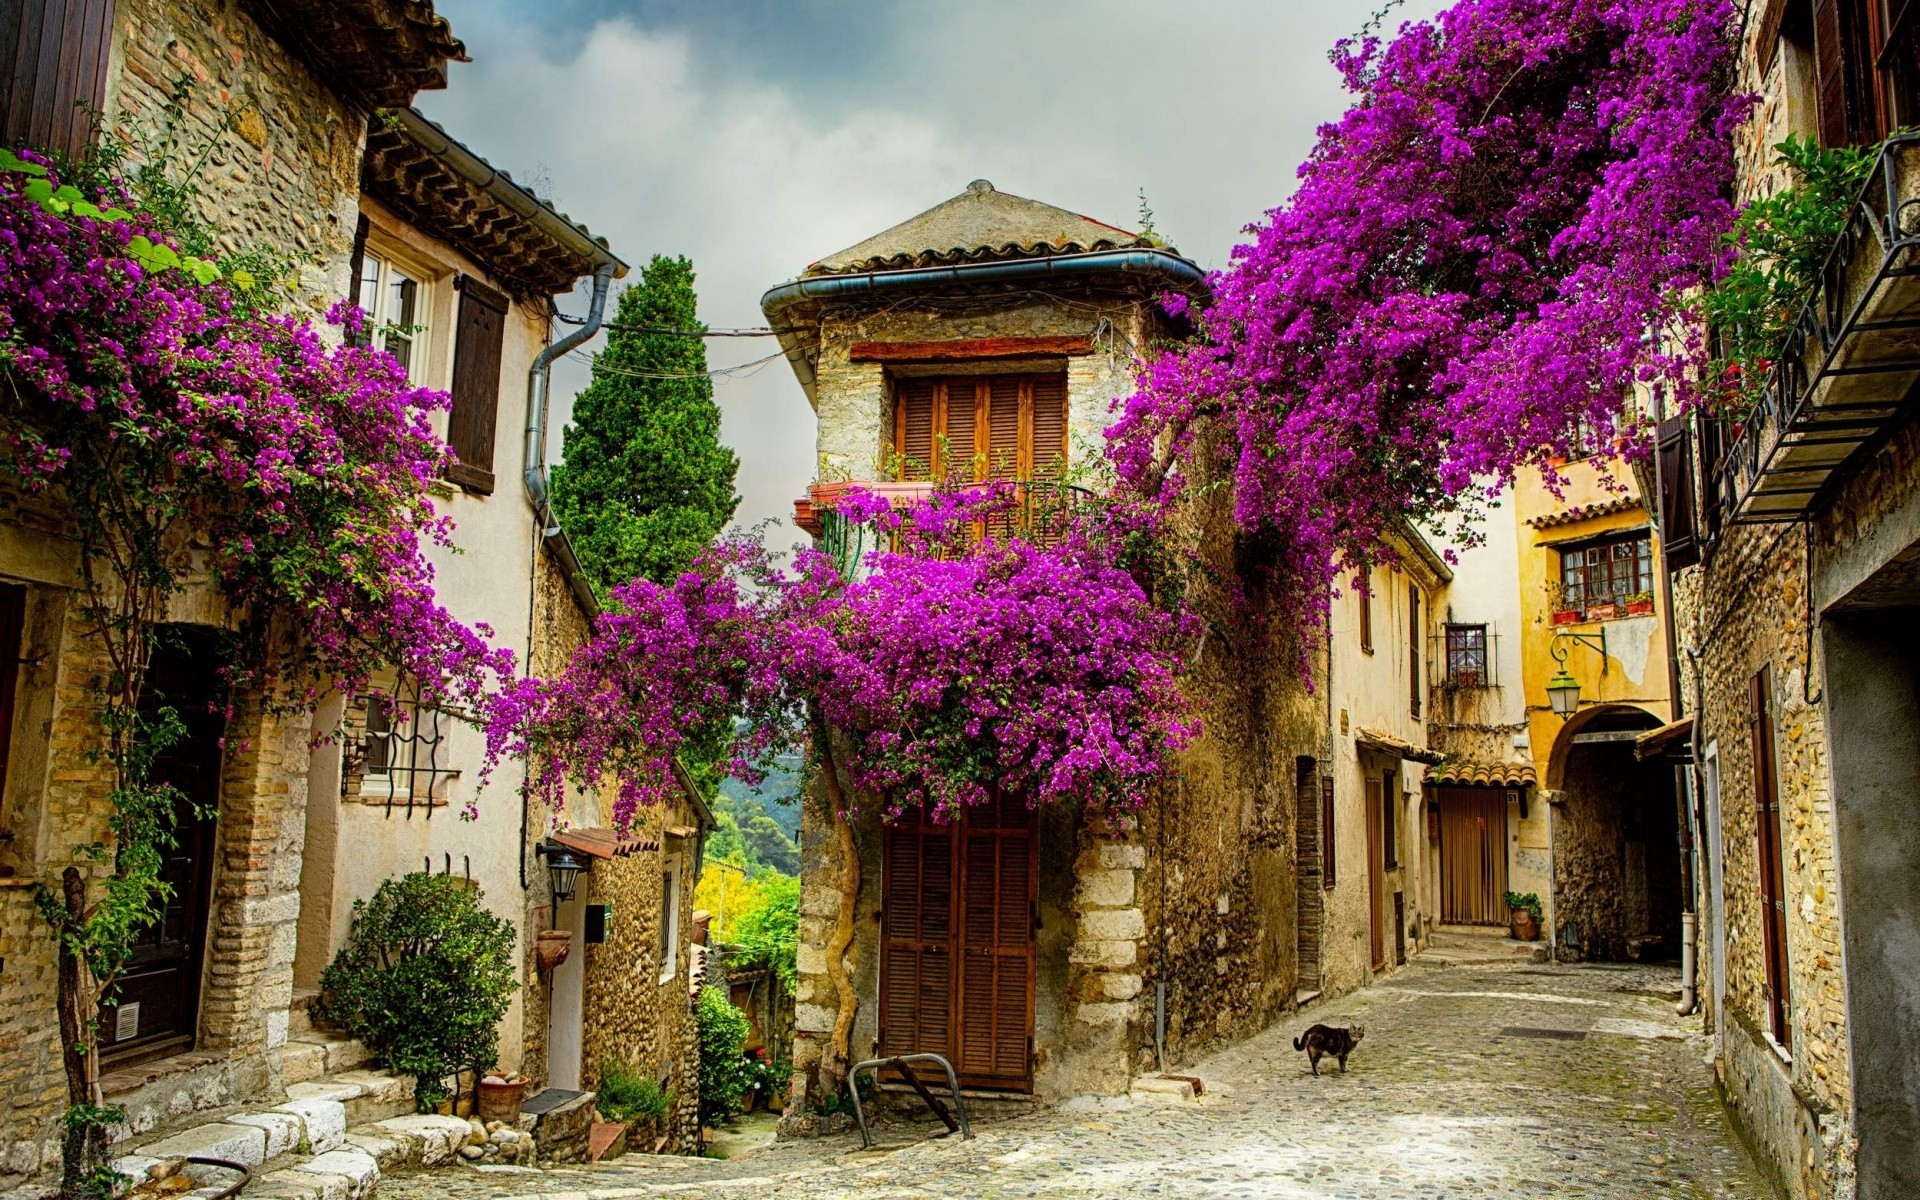 house and comfort architecture building house travel street exterior town old ancient city traditional family tourism outdoors flower window